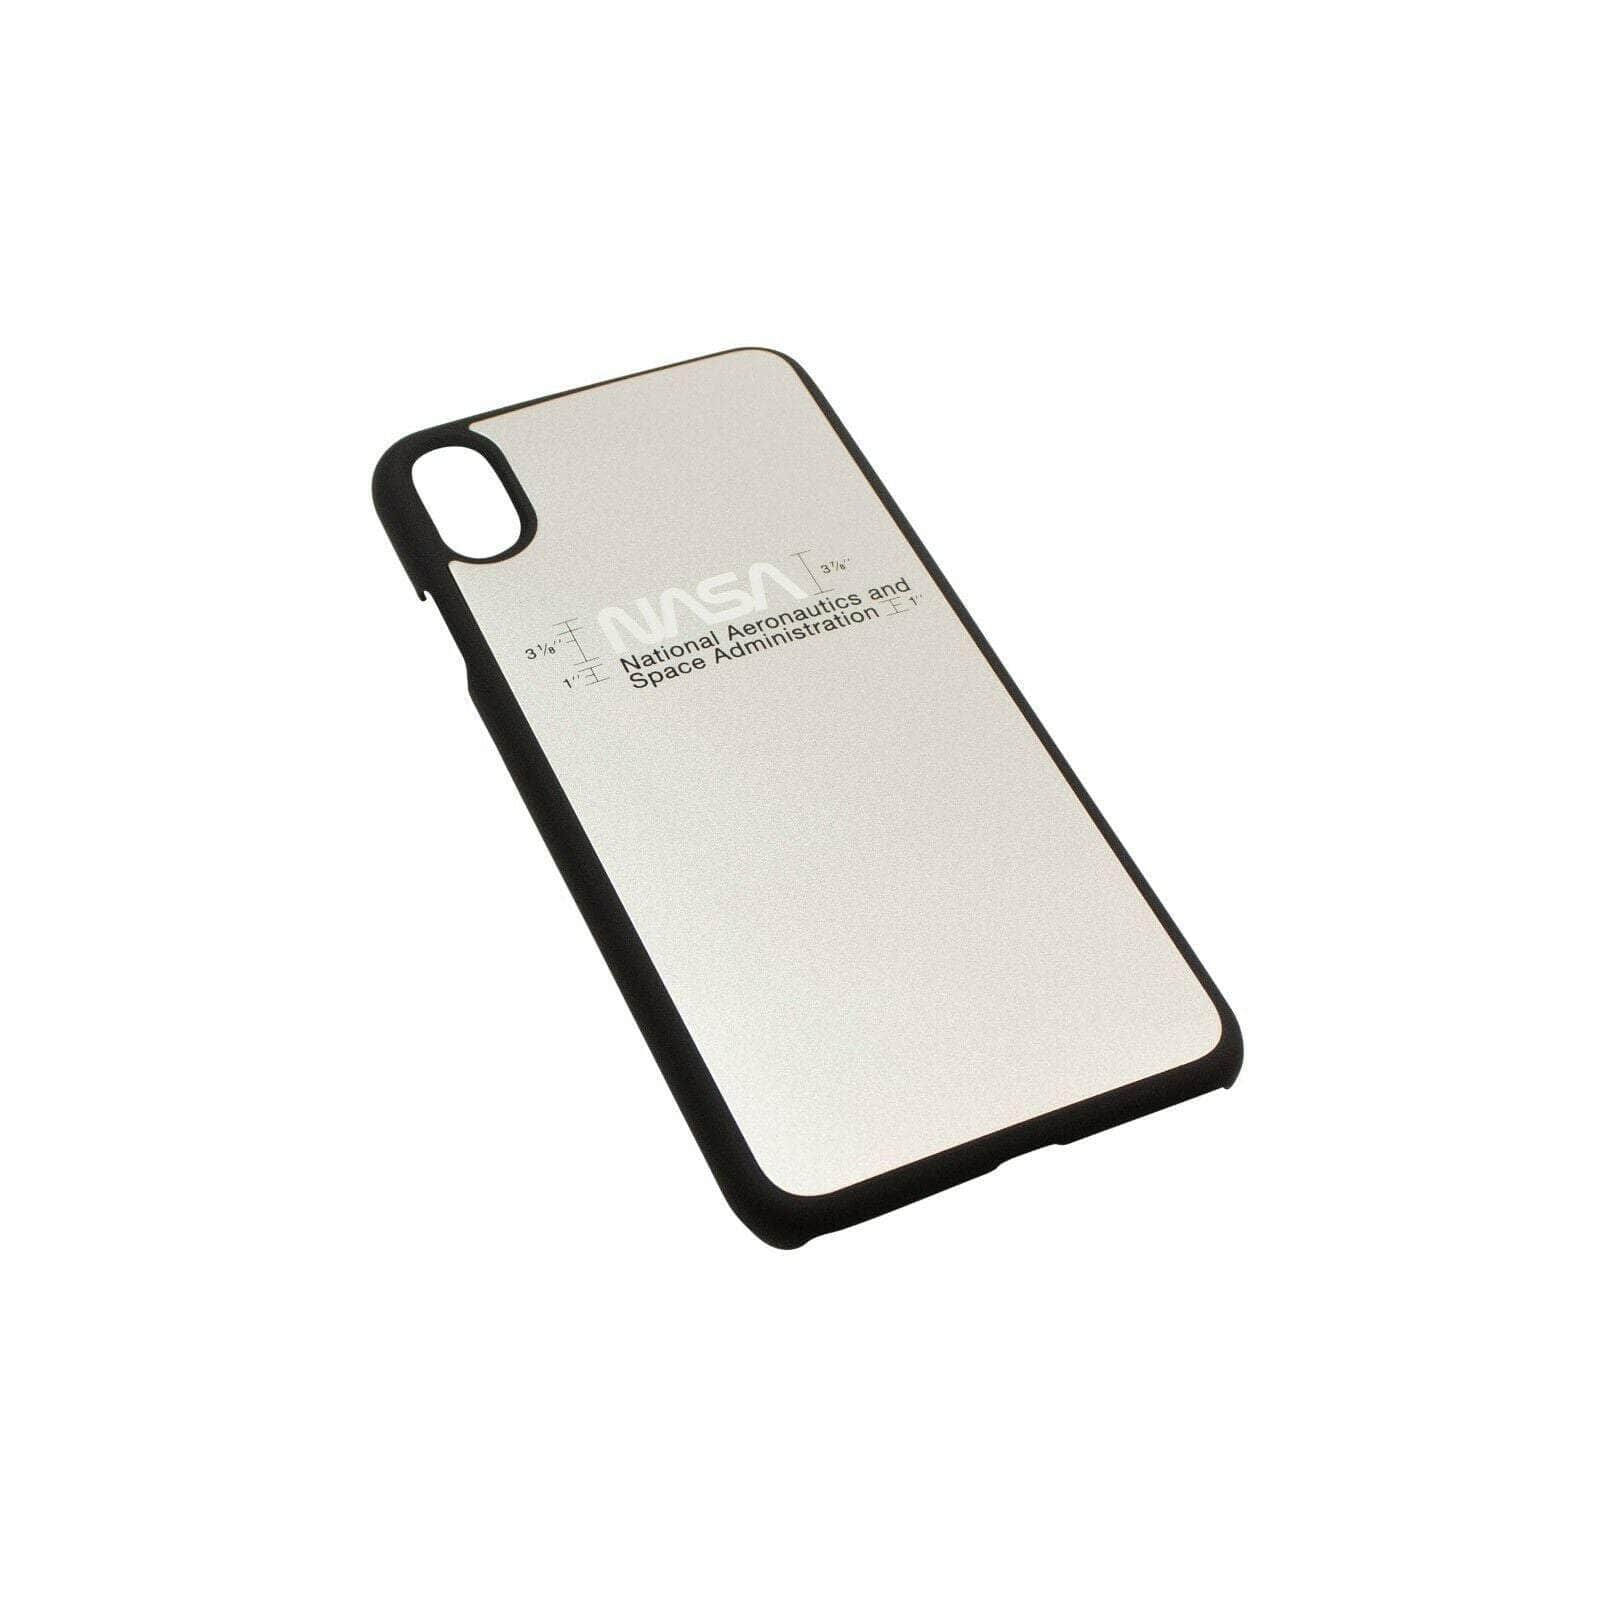 Heron Preston channelenable-all, chicmi, couponcollection, gender-womens, heron-preston, main-accessories, size-os, under-250, womens-phone-cases OS Silver NASA iPhone XR Phone Case 95-HRP-3002/OS 95-HRP-3002/OS